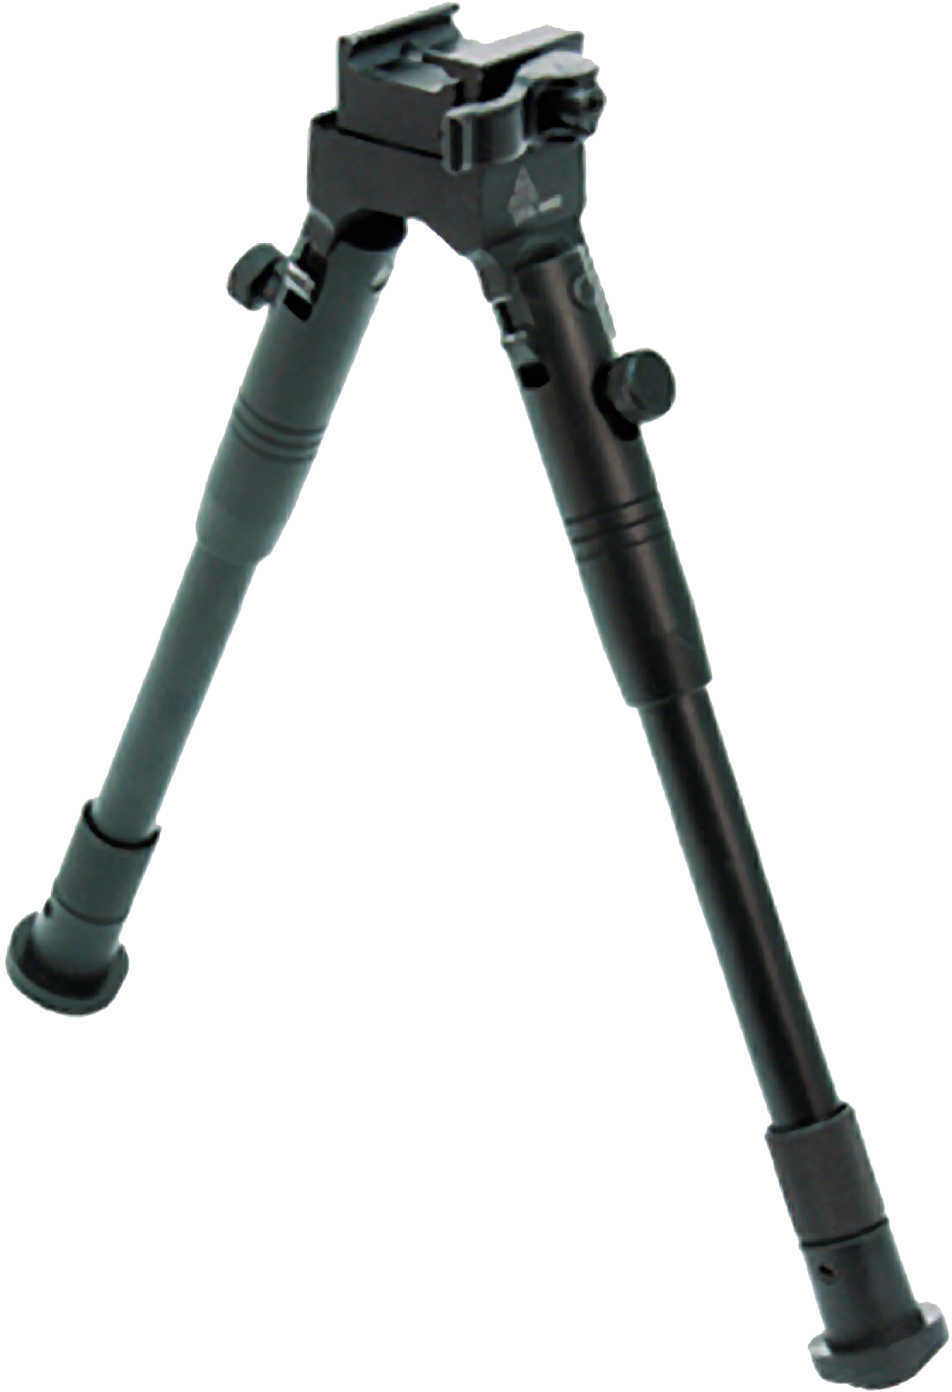 Leapers Inc. New Pro Bipod Quick Detach Height 8.7"-10.6" Md: Tl-BP69Sq-img-1